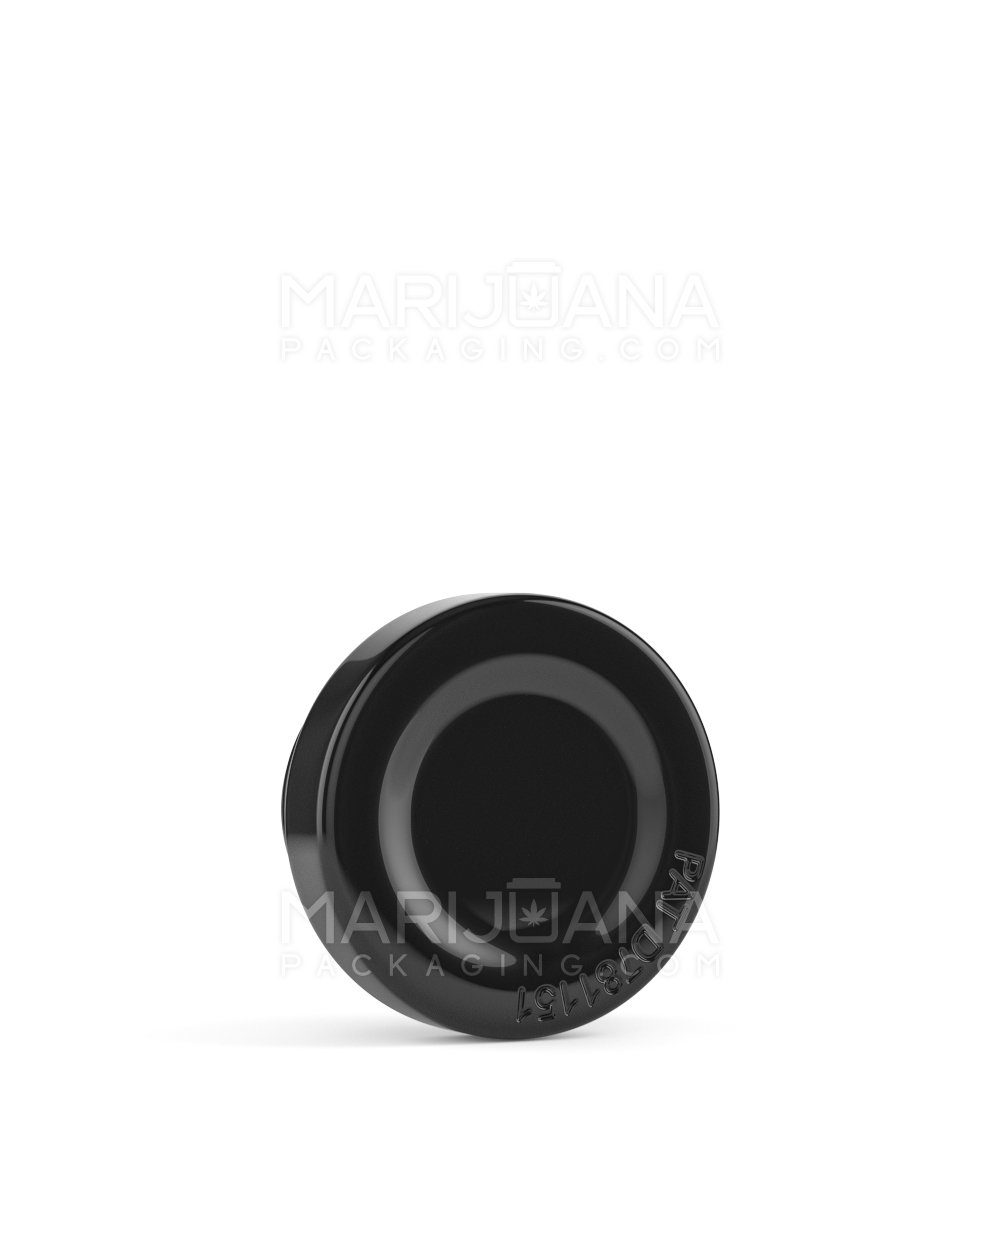 Glossy Black Glass Concentrate Containers | 28mm - 5mL - 504 Count - 4